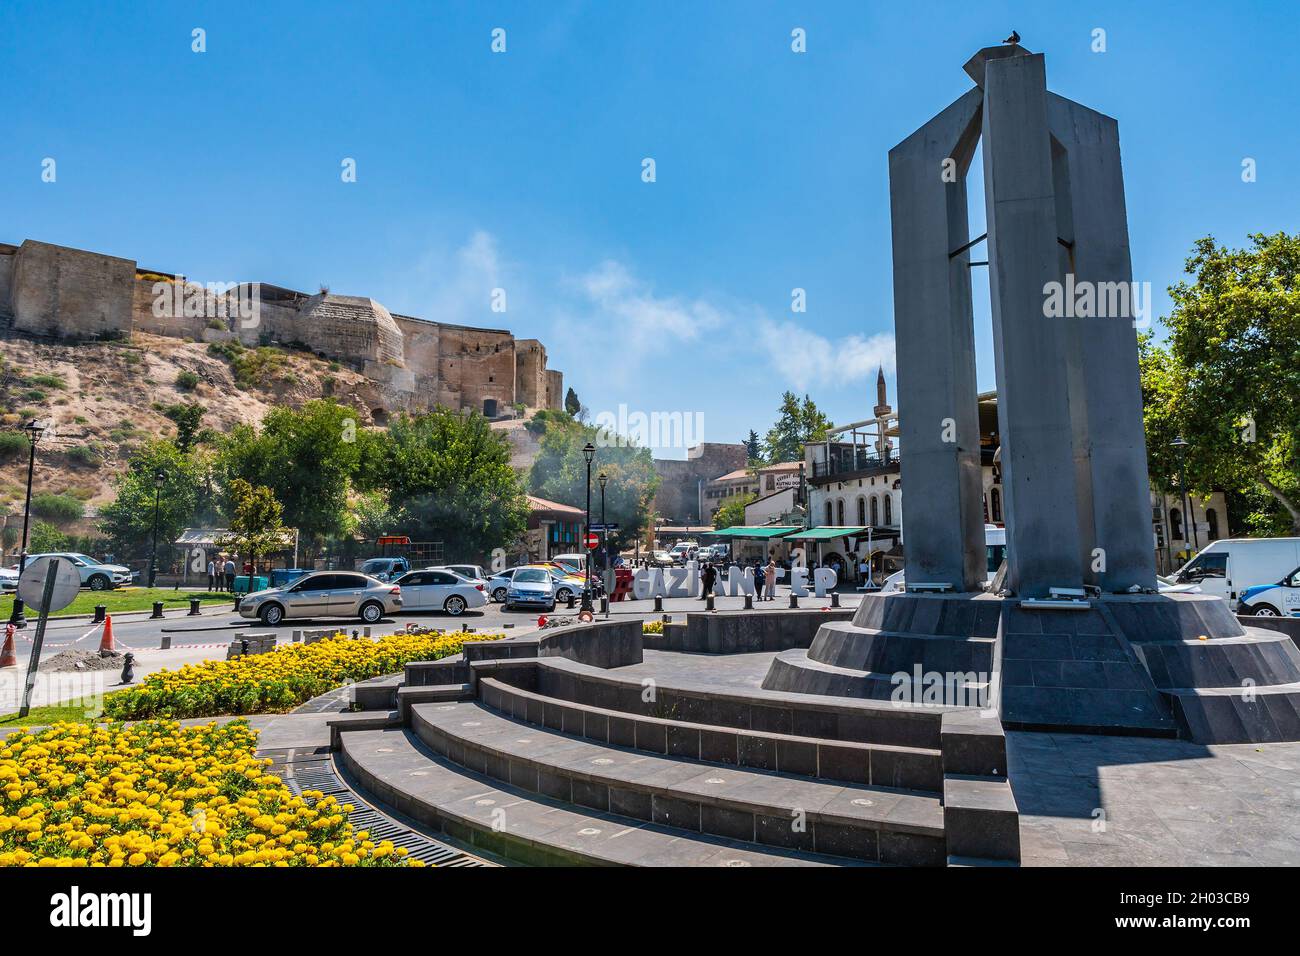 Gaziantep Kalesi Castle Breathtaking Picturesque View of Roundabout on a Blue Sky Day in Summer Stock Photo